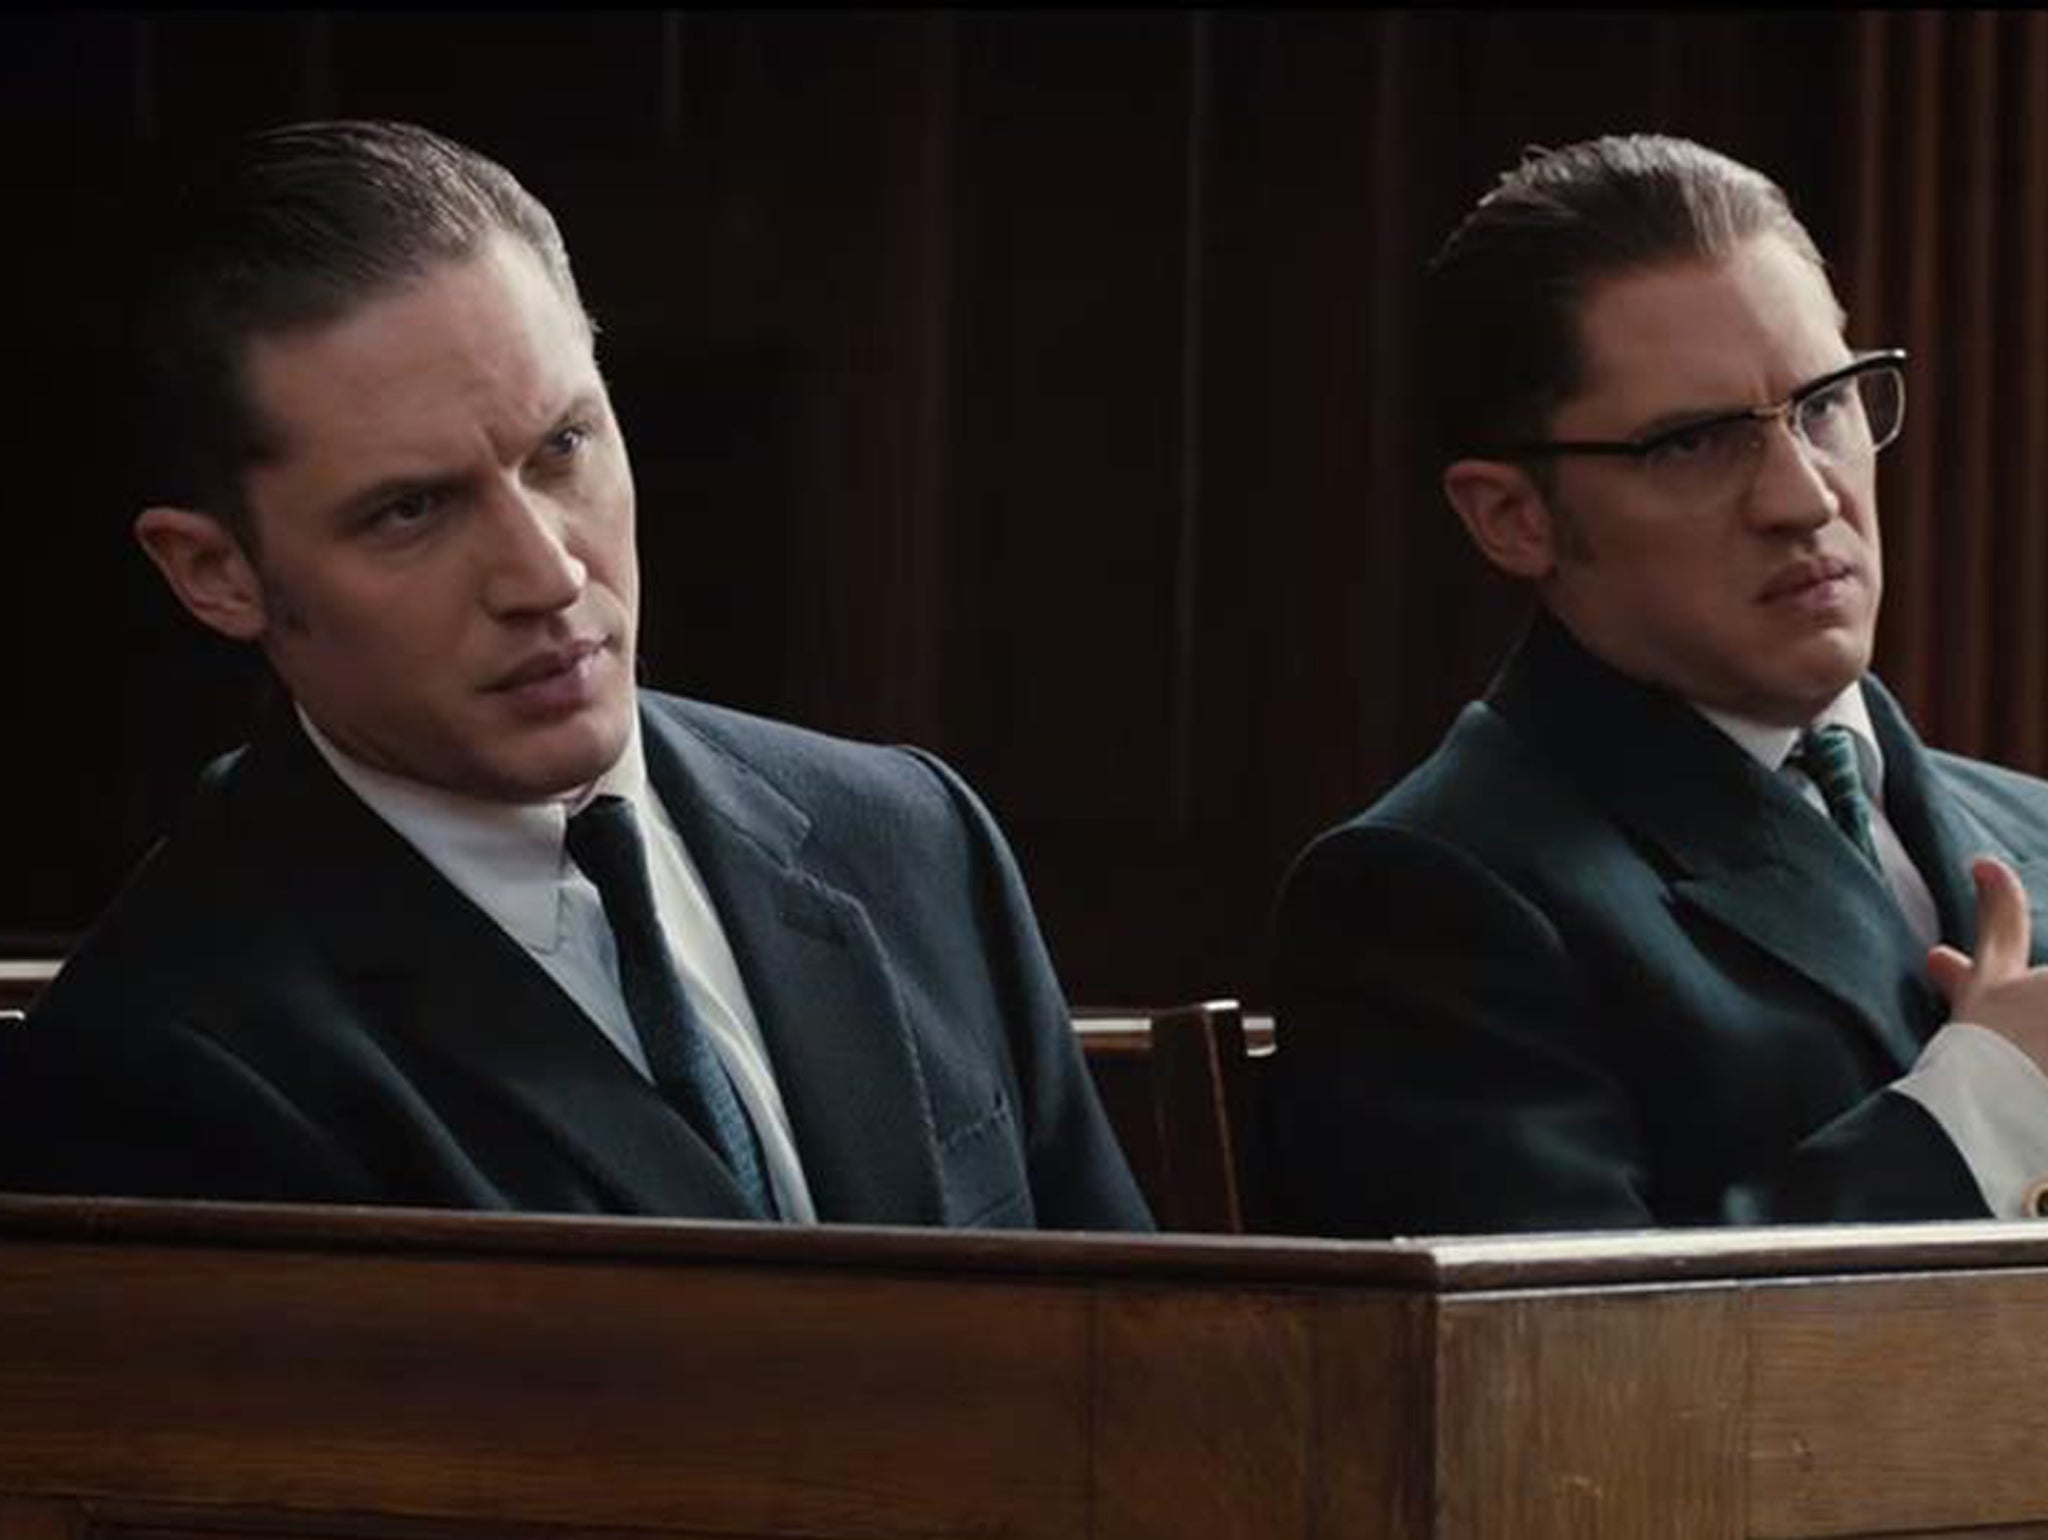 Legend trailer Watch Tom Hardy star as notorious gangster Kray twins